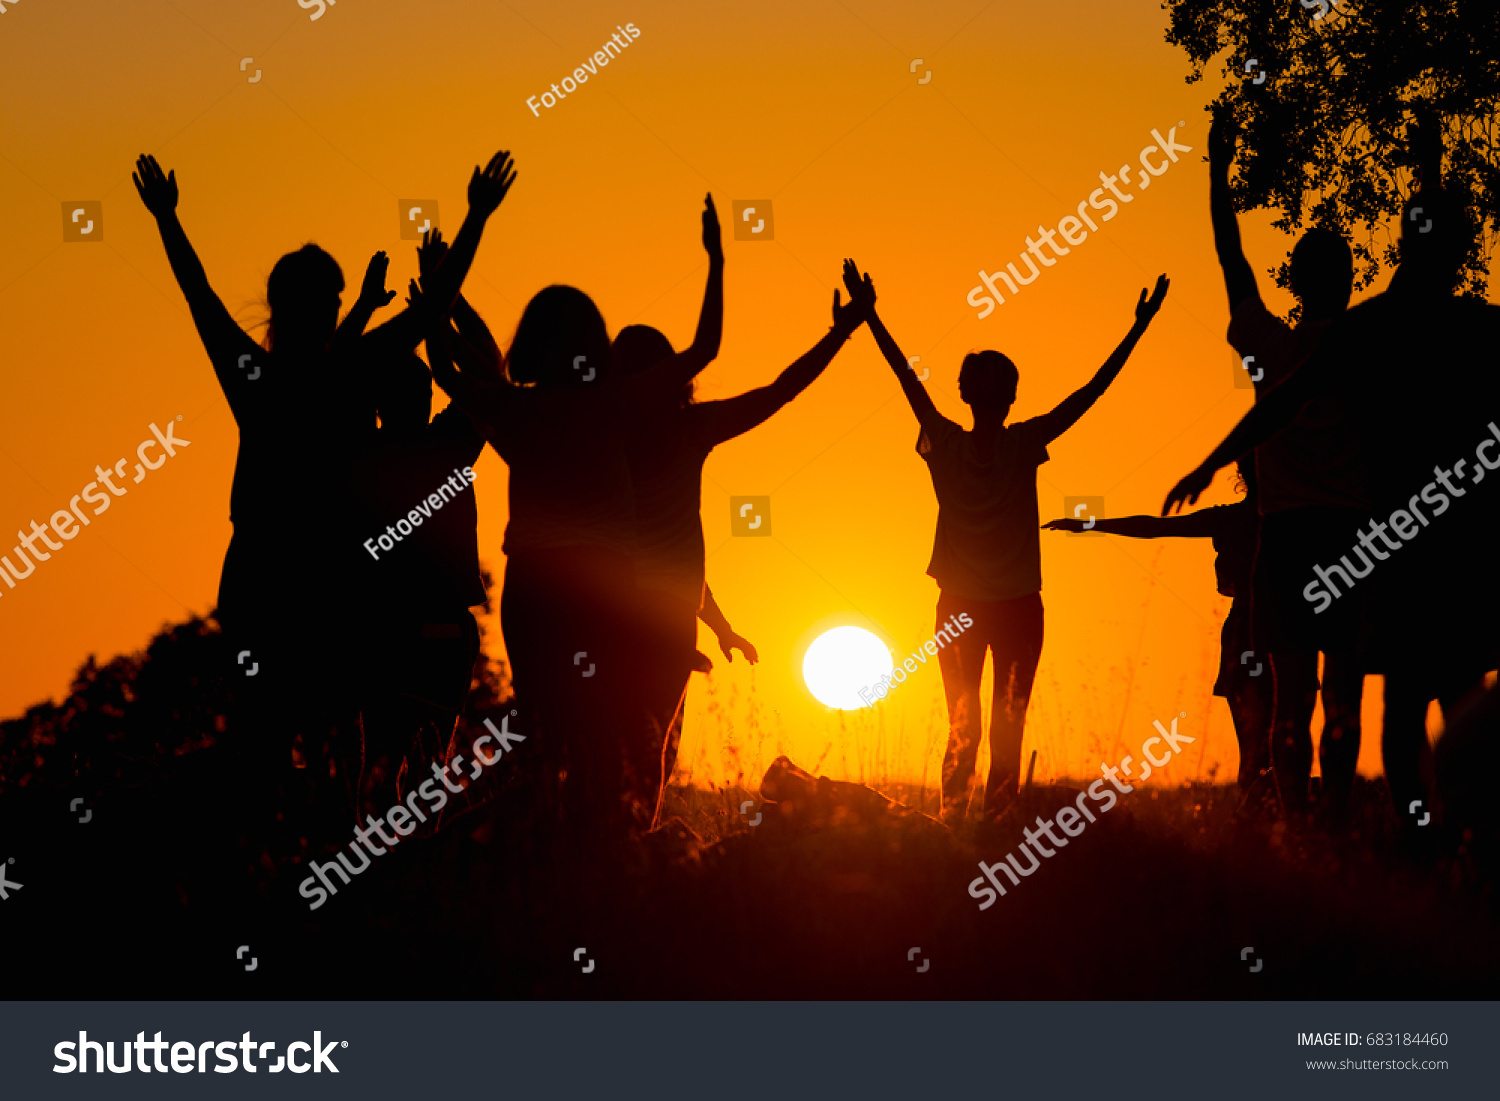 Silhouette of several people practicing yoga in the field #683184460